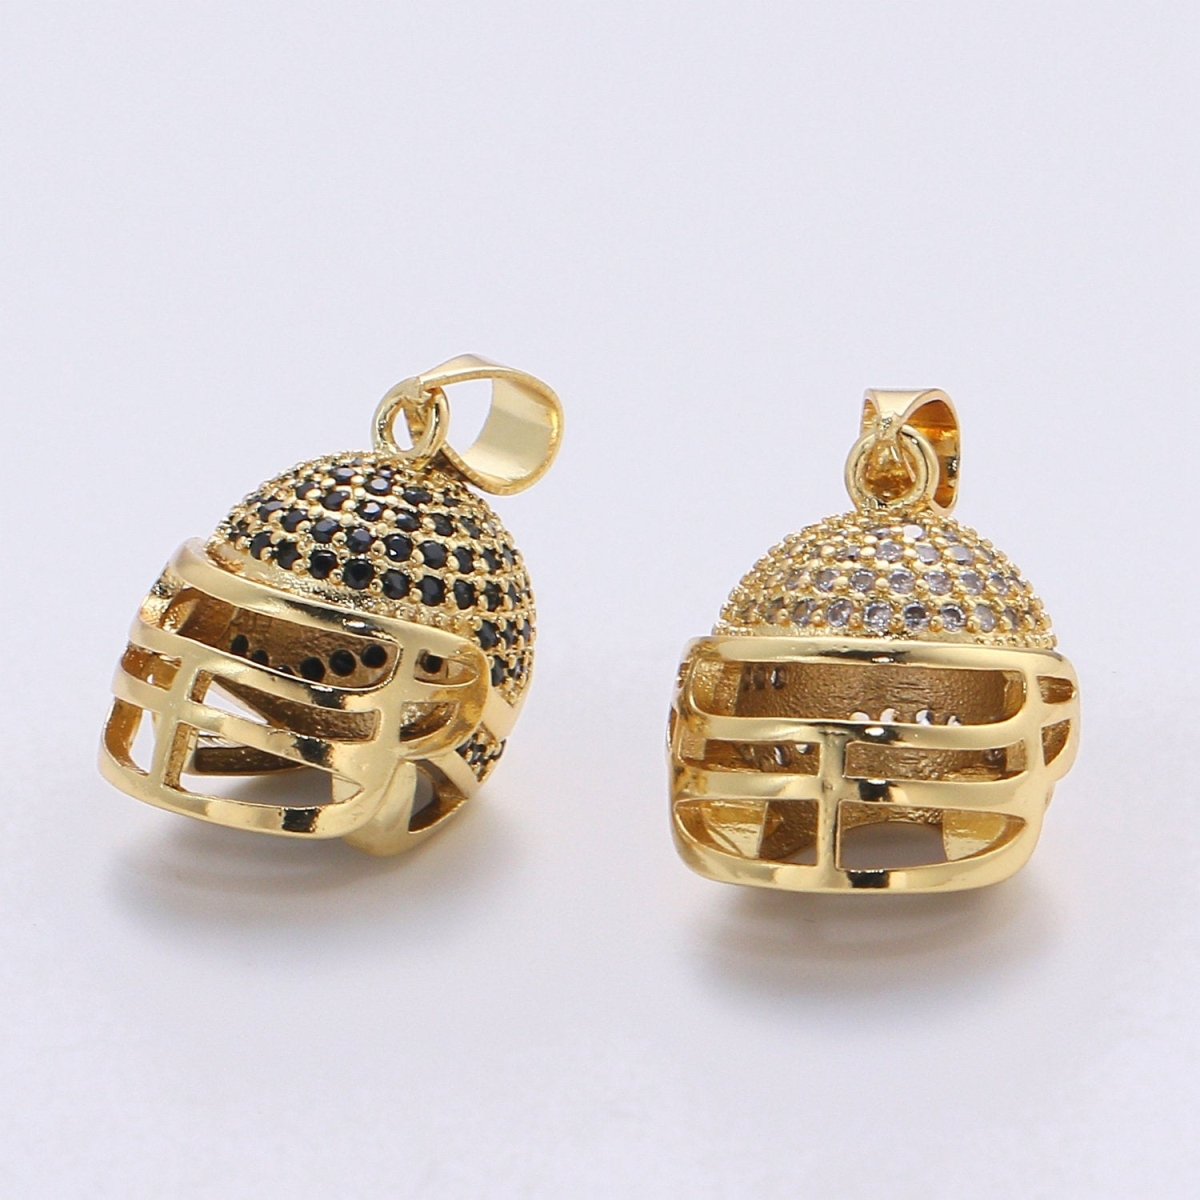 Micro Pave Football Helmet Charm Cubic Helm 3D Helmet charm 24k Gold Filled Pendant for Necklace Unisex Men Jewelry supply, PDGF-1731/I-795 - DLUXCA